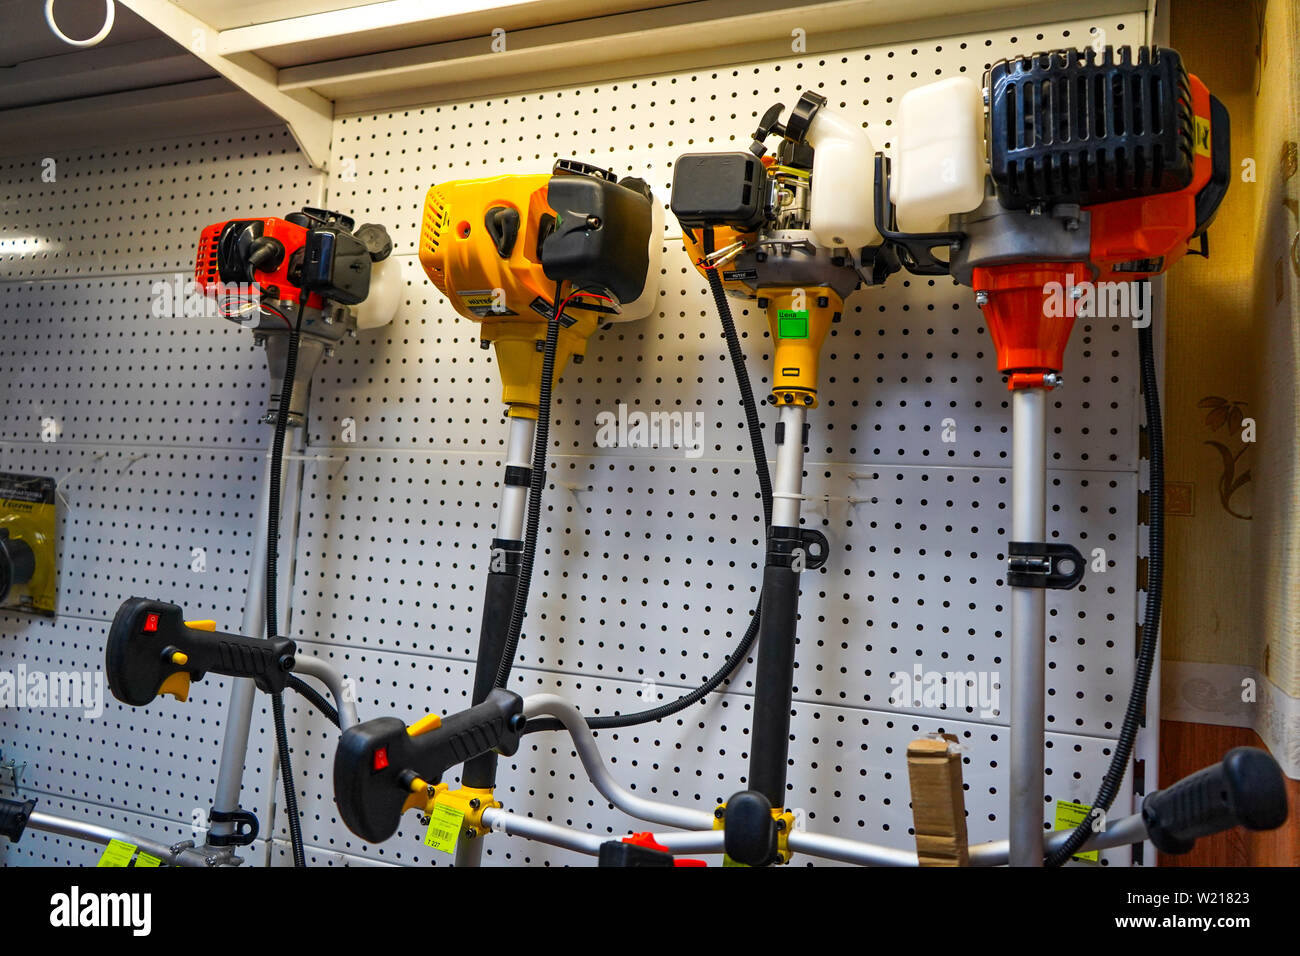 Chelyabinsk Region, Russia - JUNE 2019. Hardware store. Sale Electric trimmers for mowing lawns of various manufacturers in store. Stock Photo